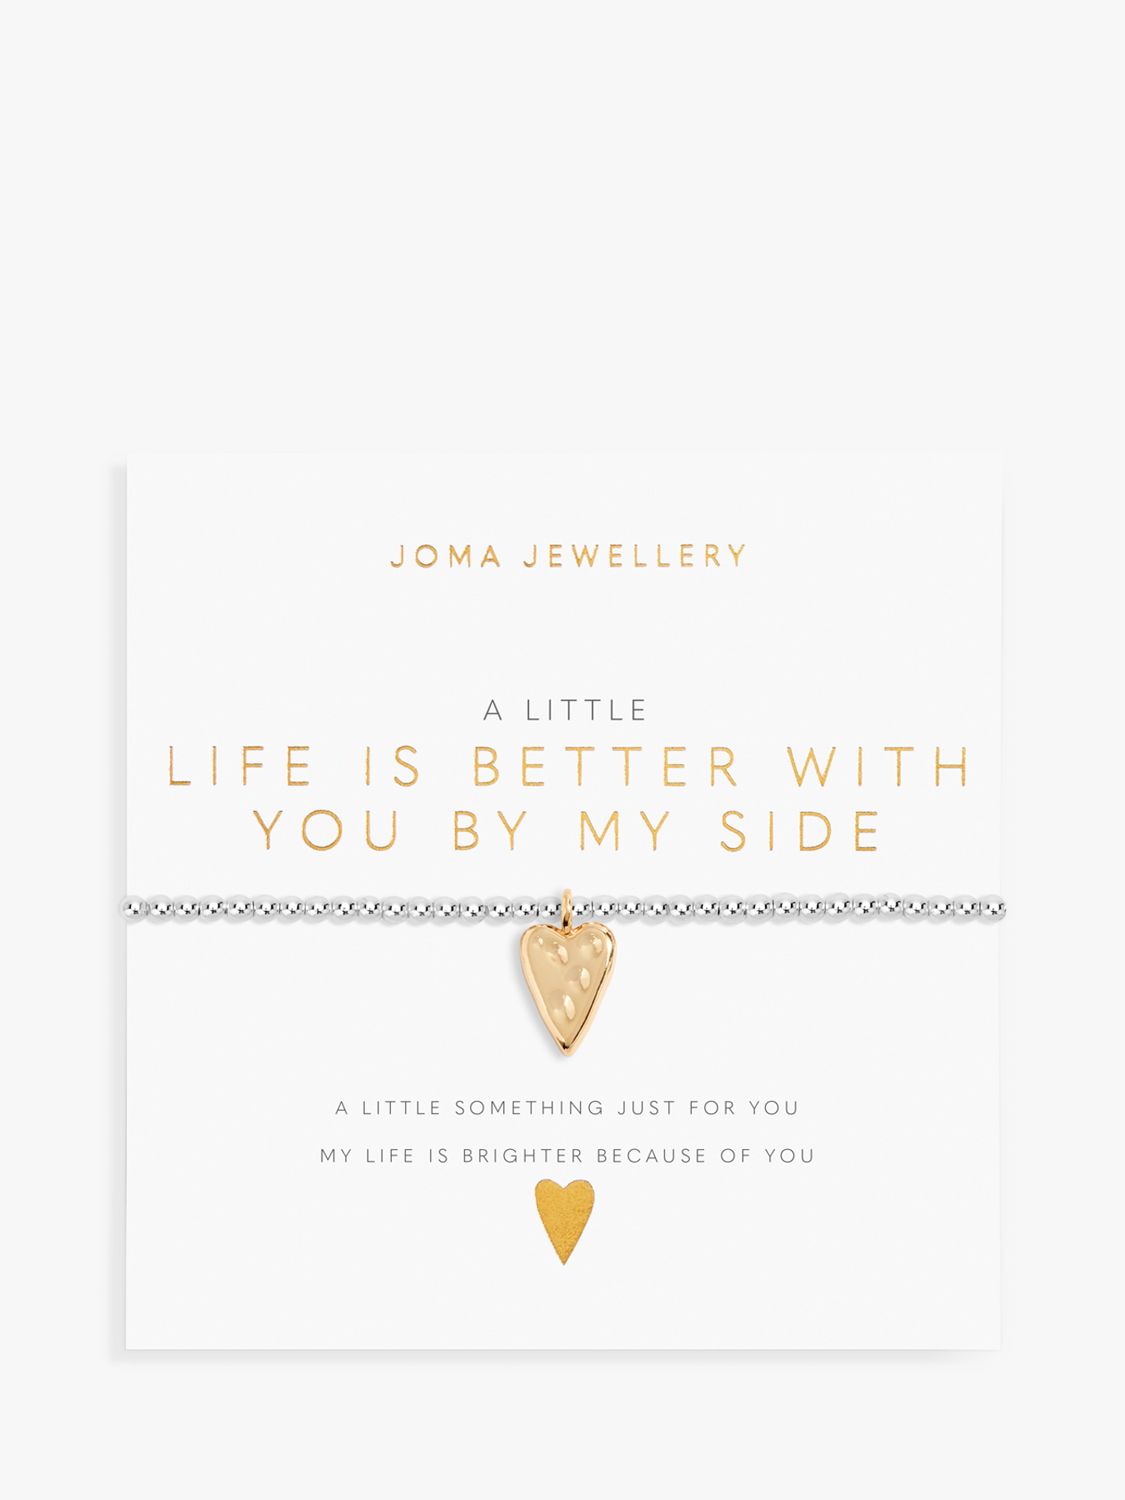 Joma Jewellery 'Life Is Better With You By My Side' Bracelet, Silver/Gold